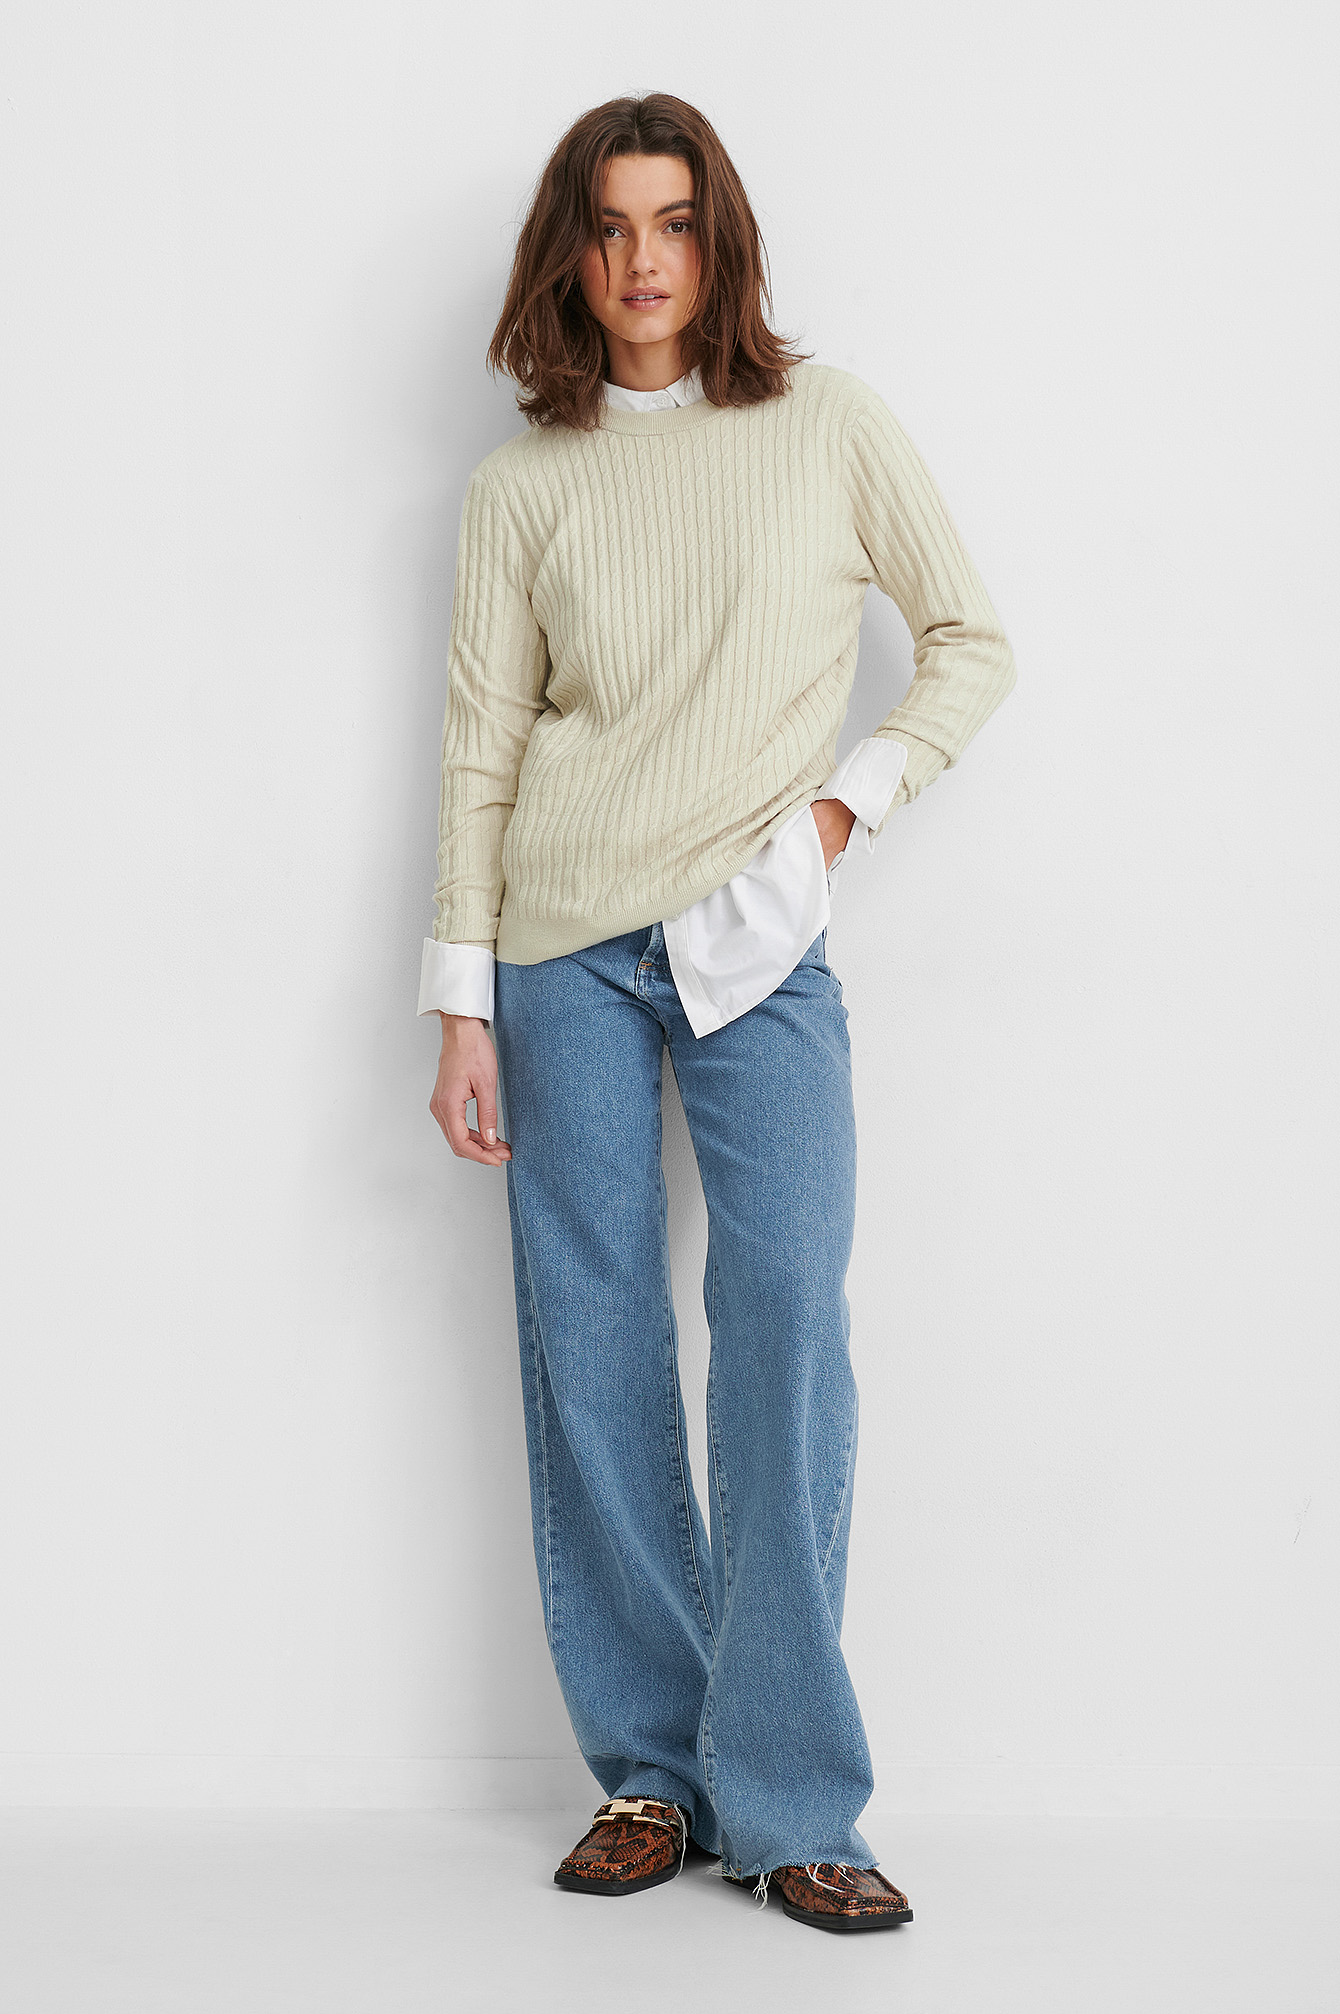 Basic Soft Roundneck Sweater Outfit.